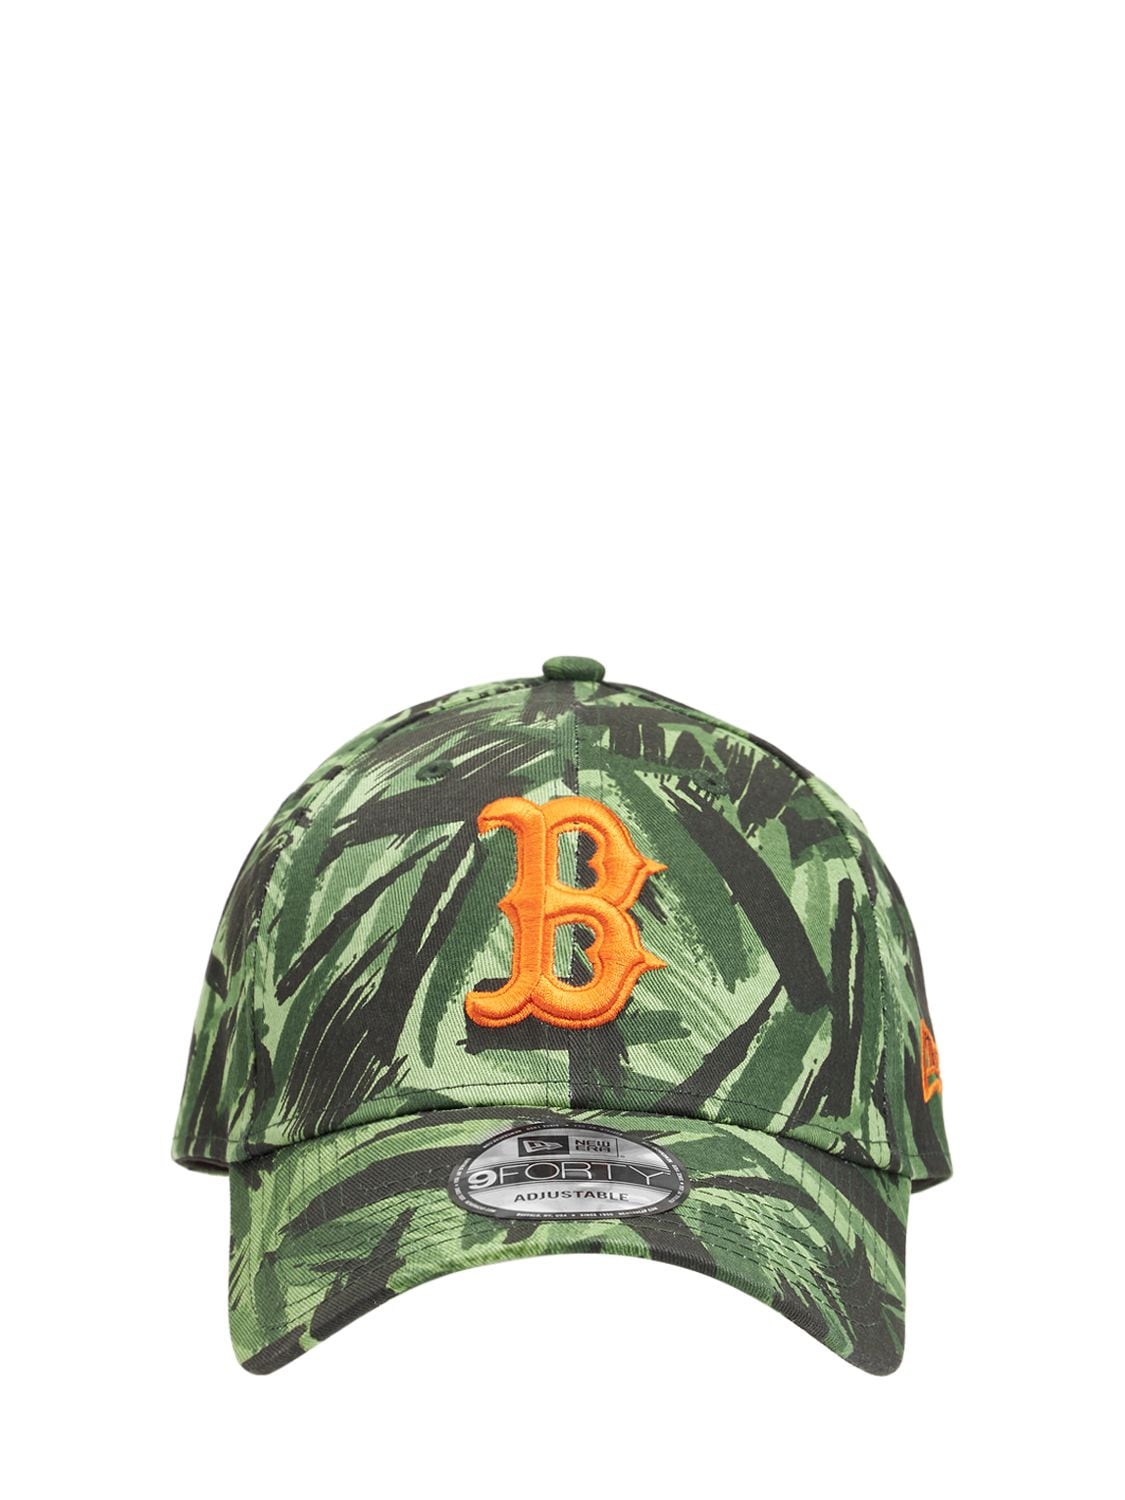 Mlb Camo Boston Red Sox 9forty Cap